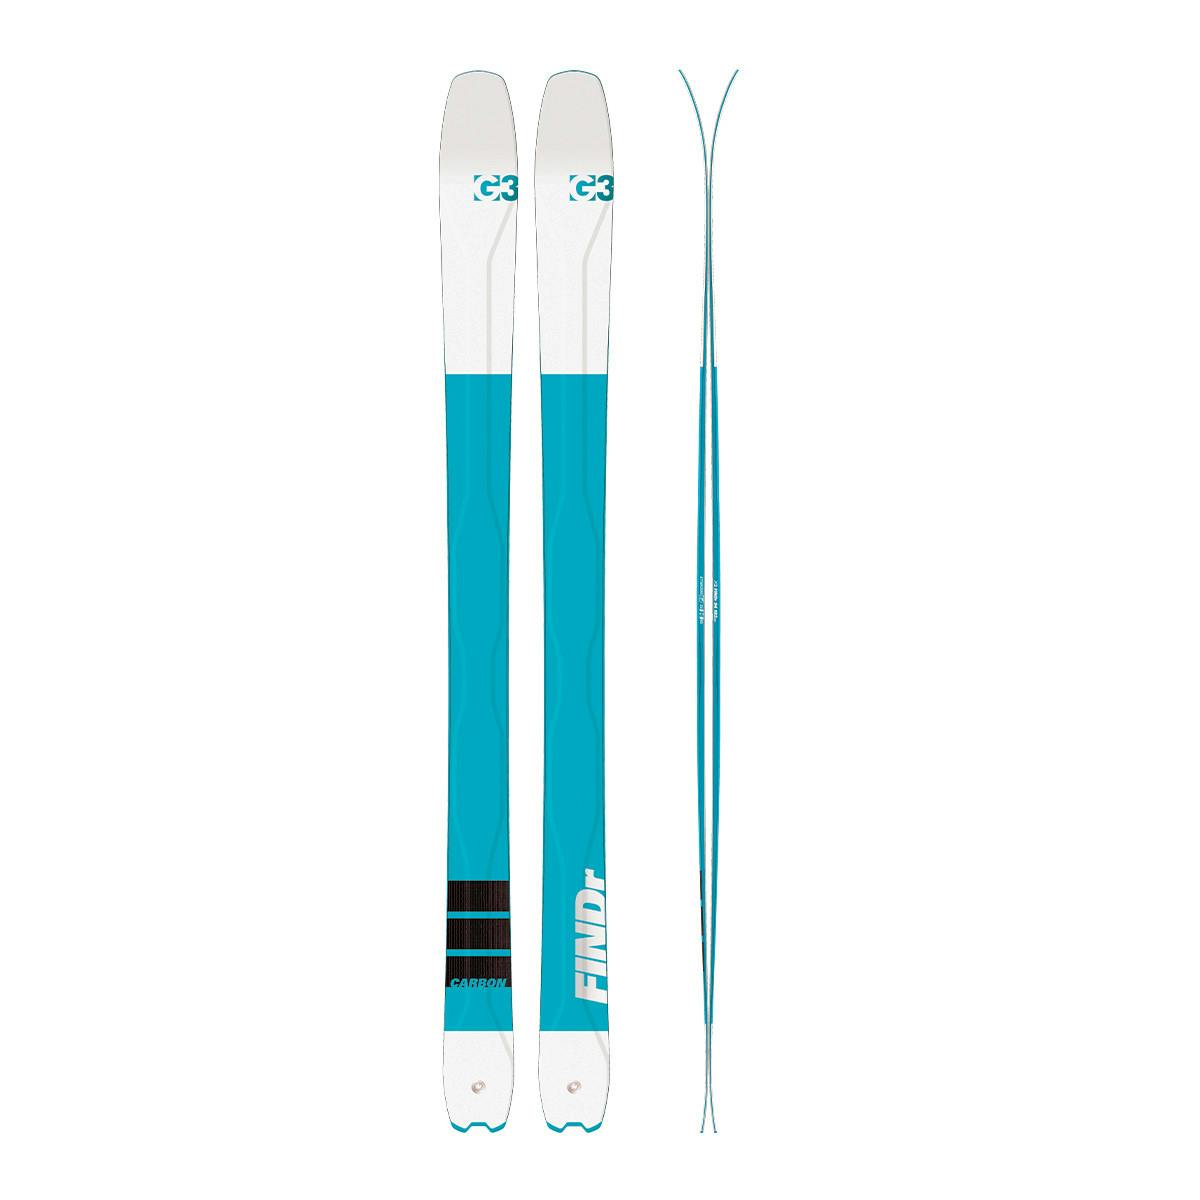 FINDr 102 Swift Skis Teal